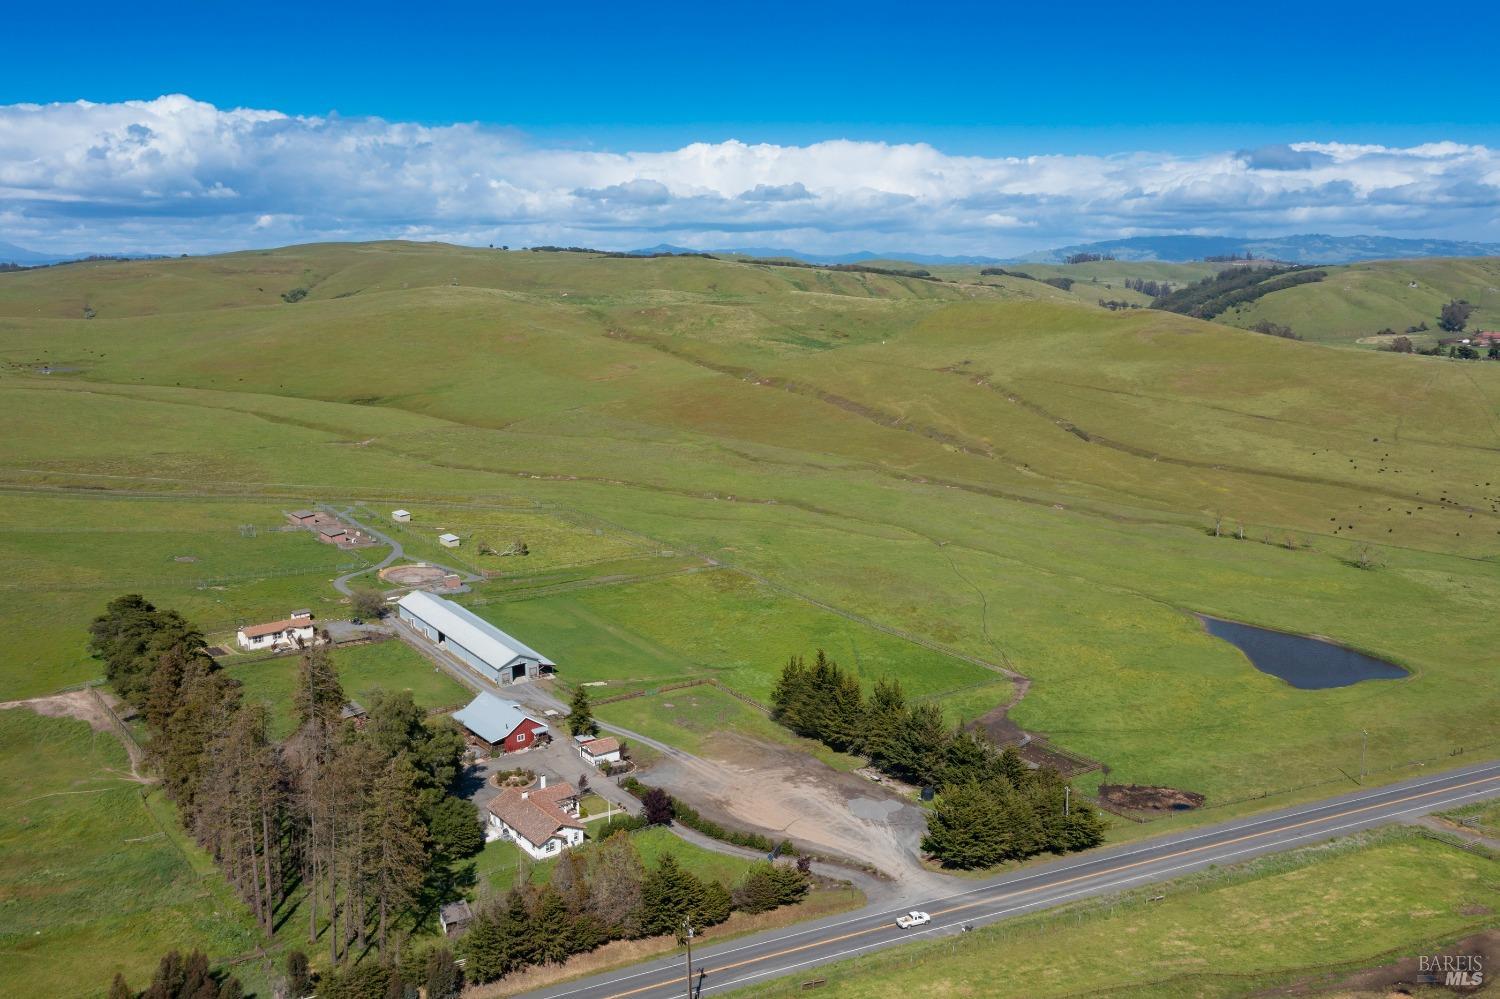 Just outside Petaluma: Pristine 65+- acre ranch with 3 legal residences surrounded by lovely views.